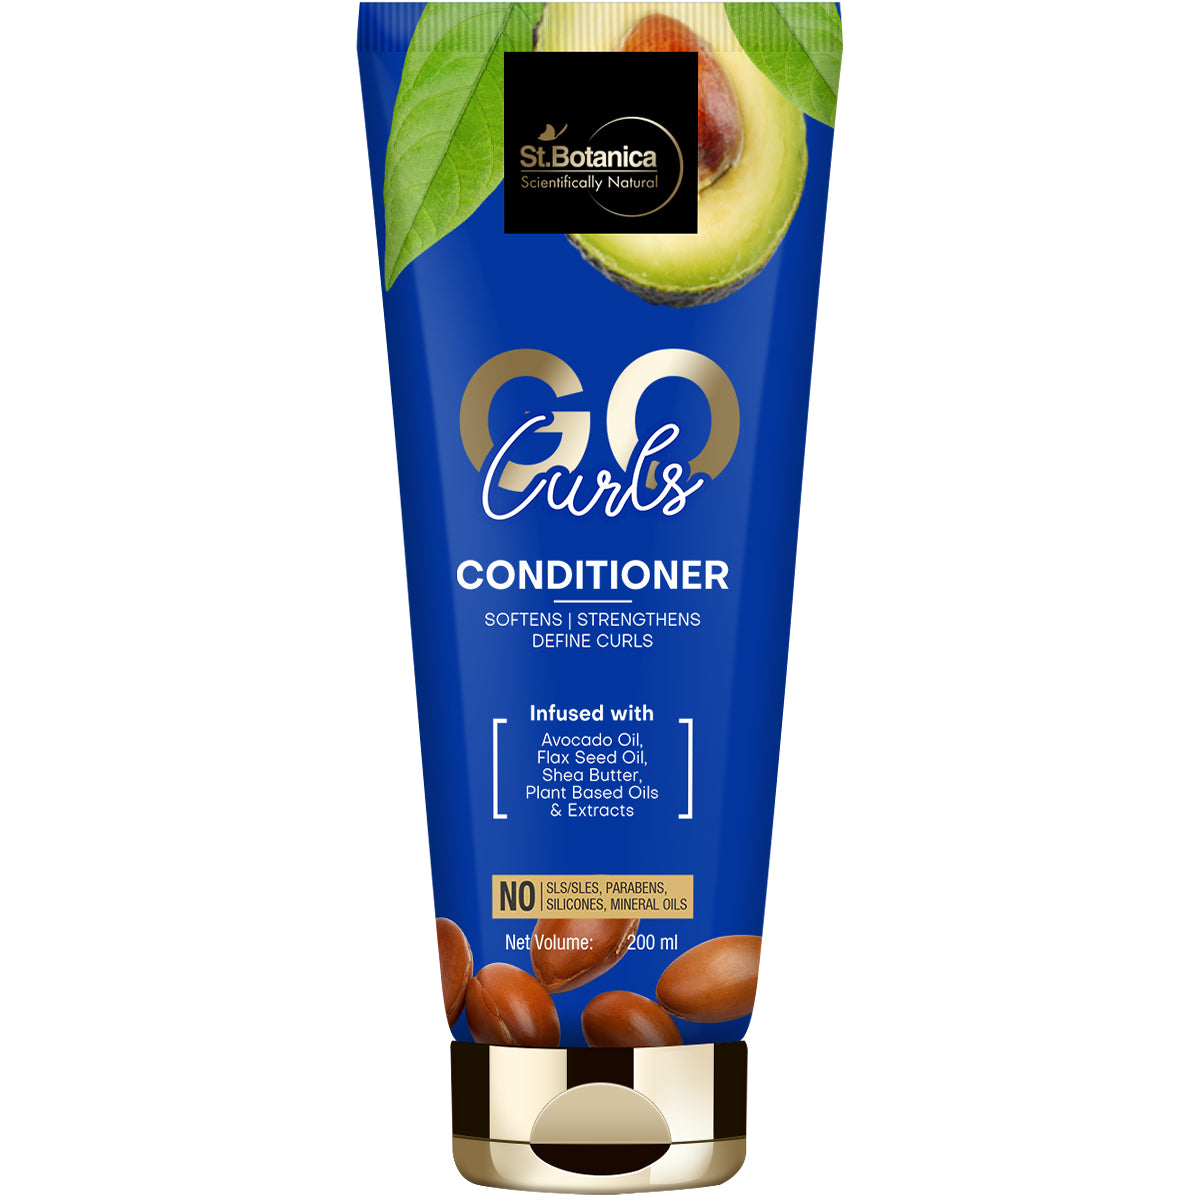 St.Botanica Go Curl Shampoo + Conditioner For Curly Hair, 200ml Each, No SLS/Sulphate, Paraben, Silicones, Colors